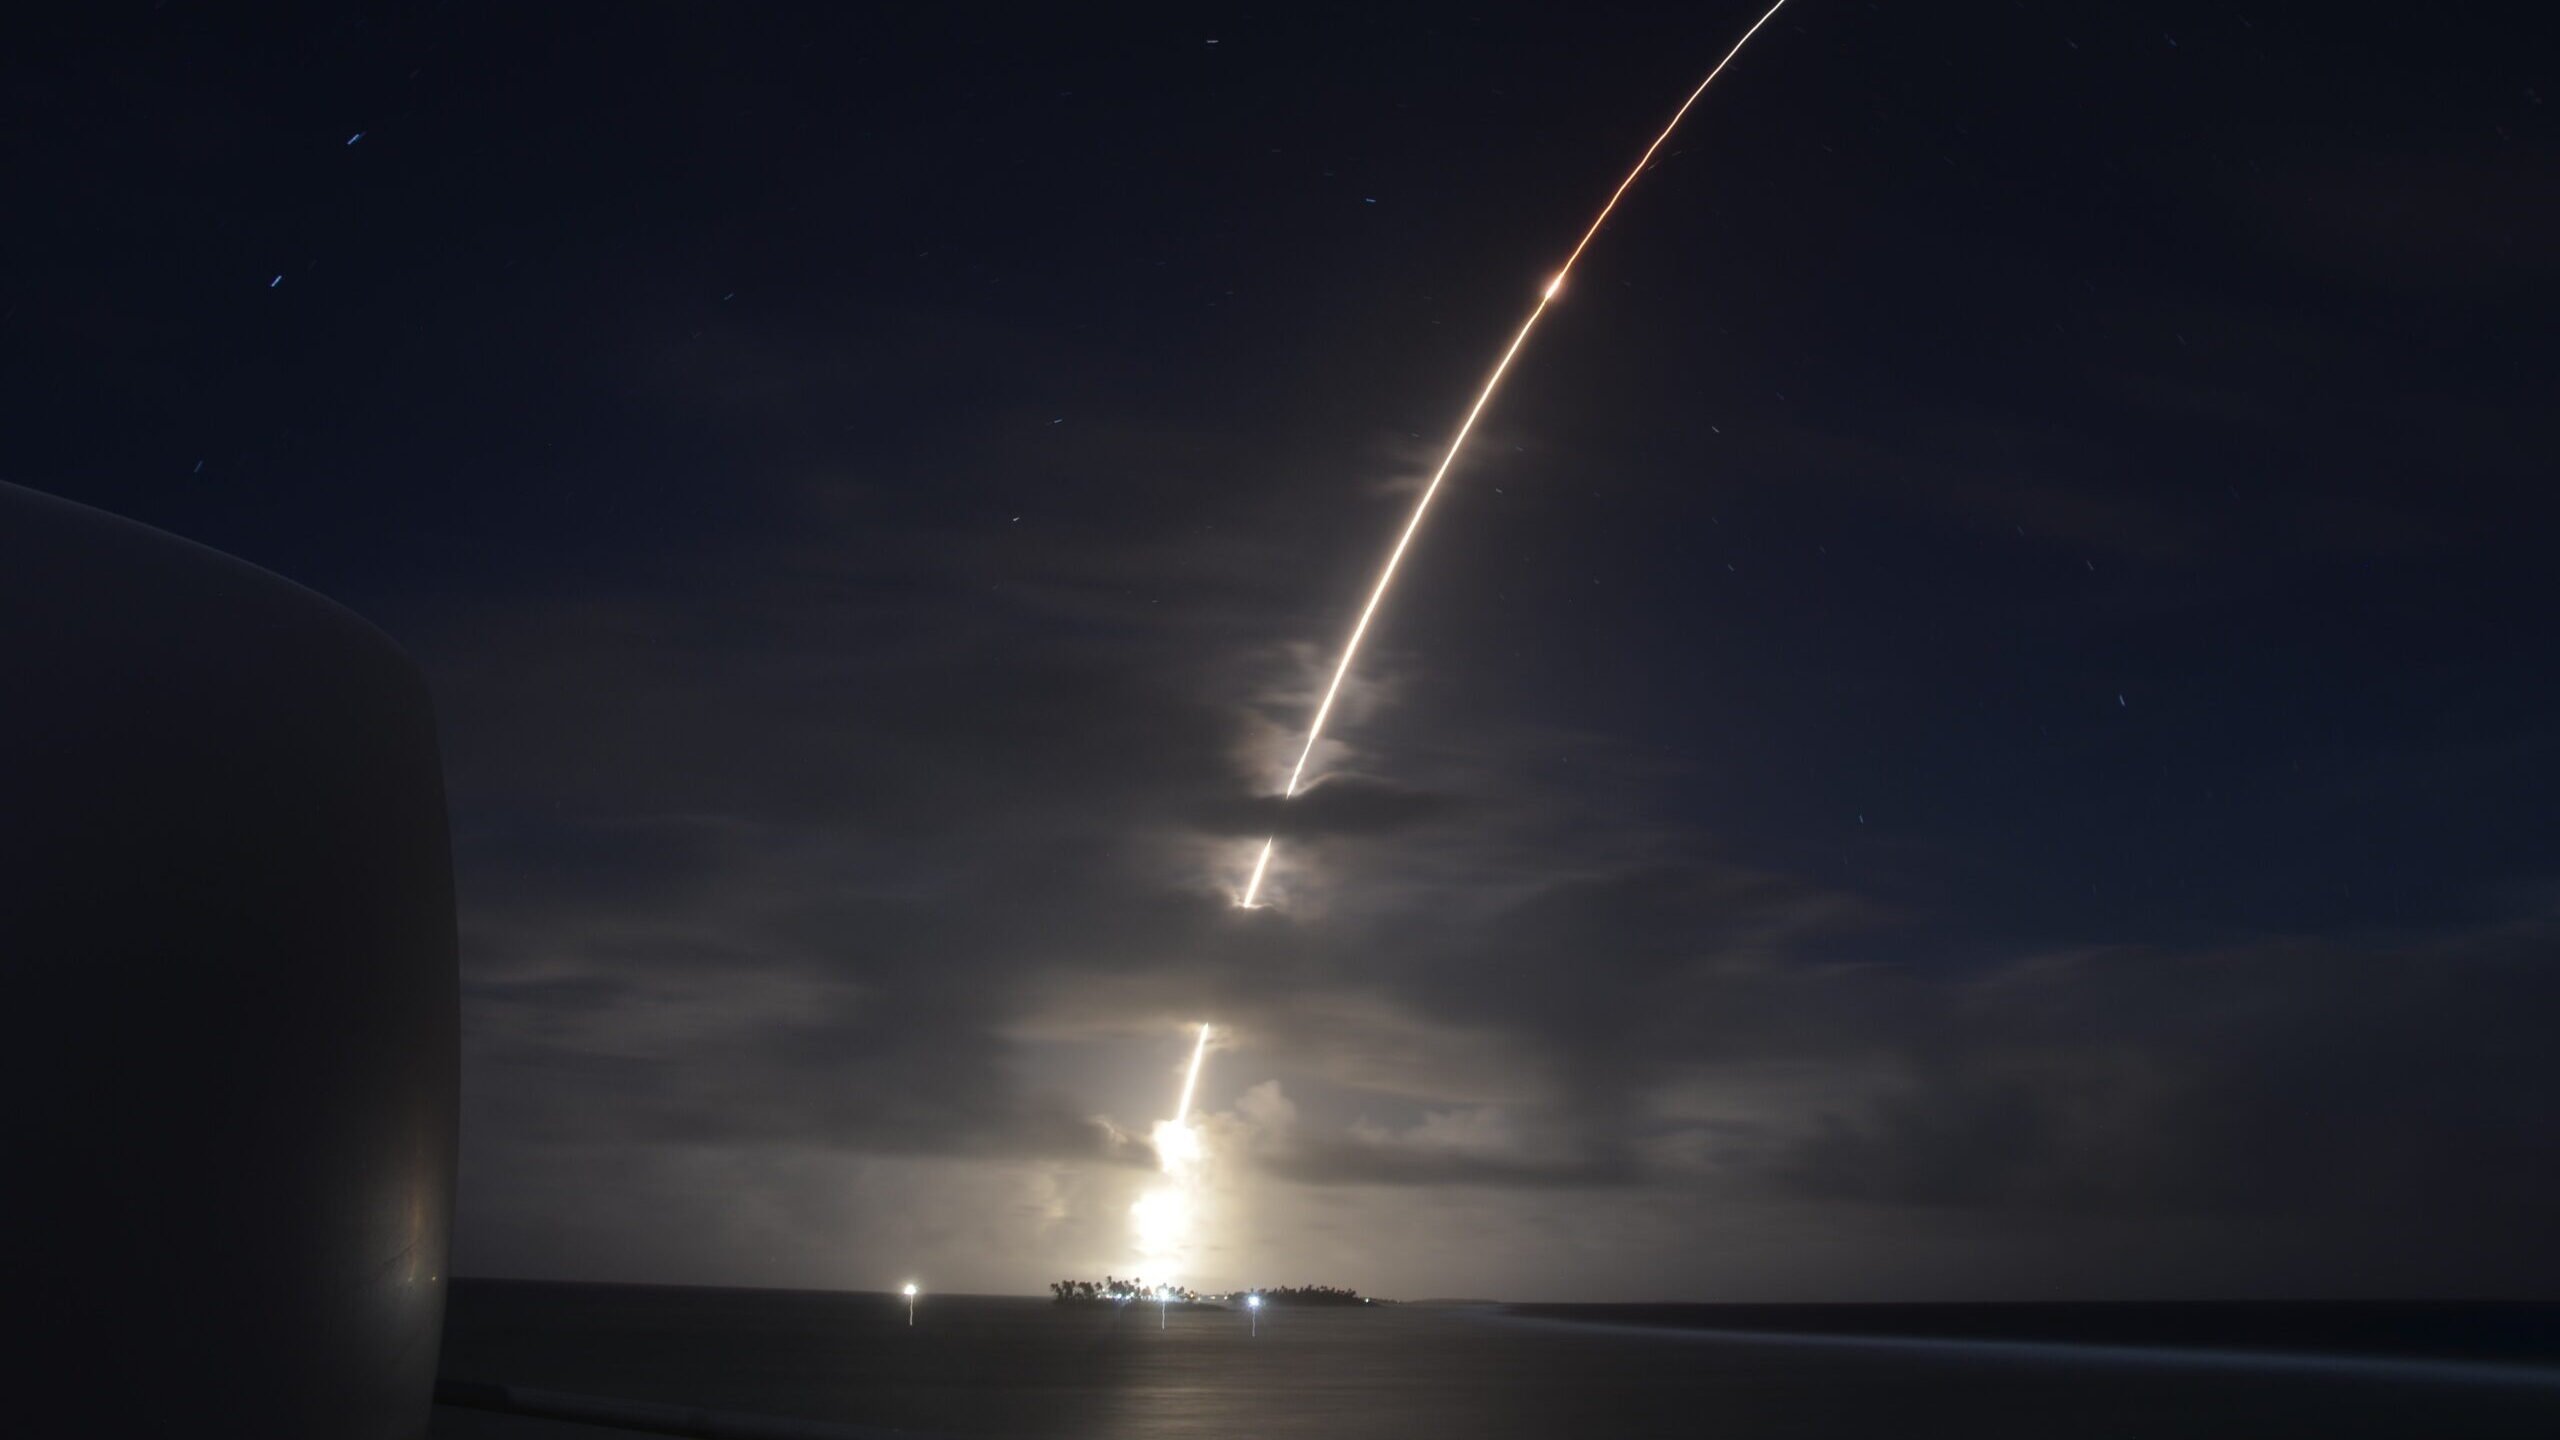 Missile threats are more than just theoretical — here are realistic solutions